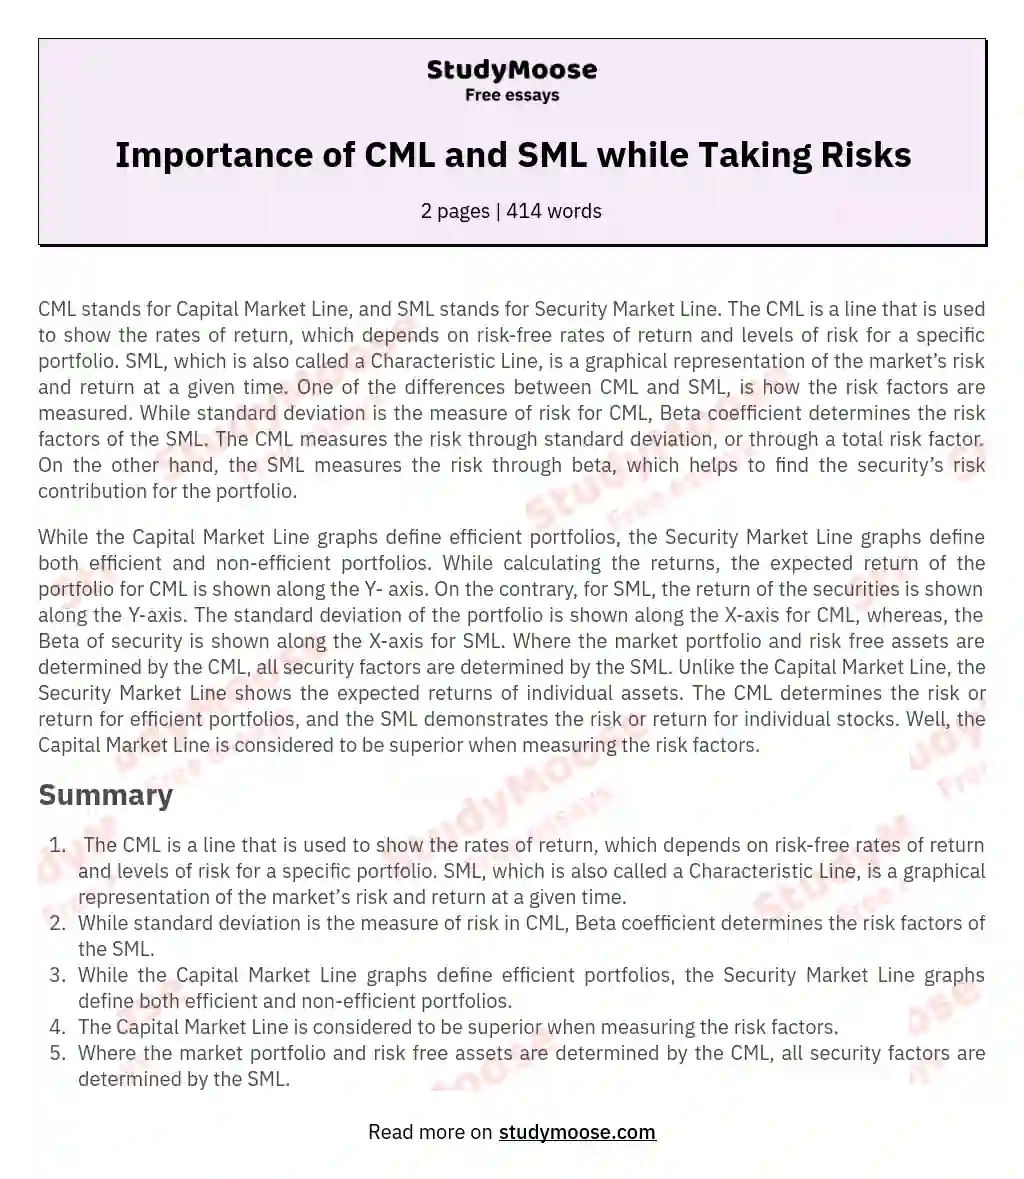 Importance of CML and SML while Taking Risks essay